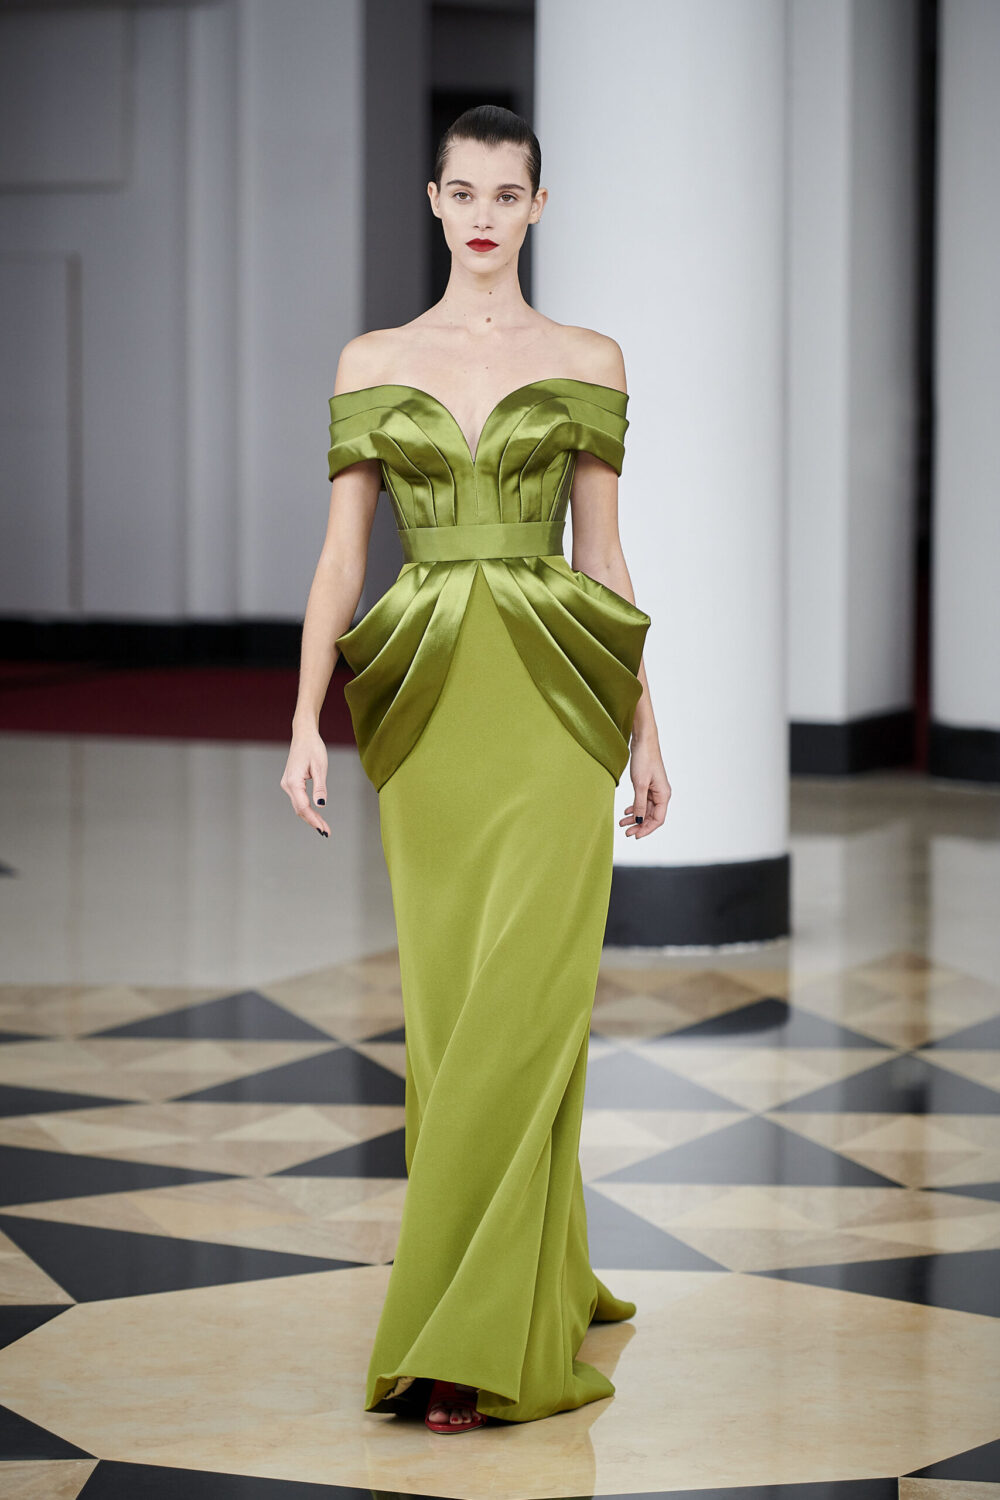 Alexis Mabille Spring 2021 Couture Collection Runway I Dreaminlace.com #couture #luxuryfashion